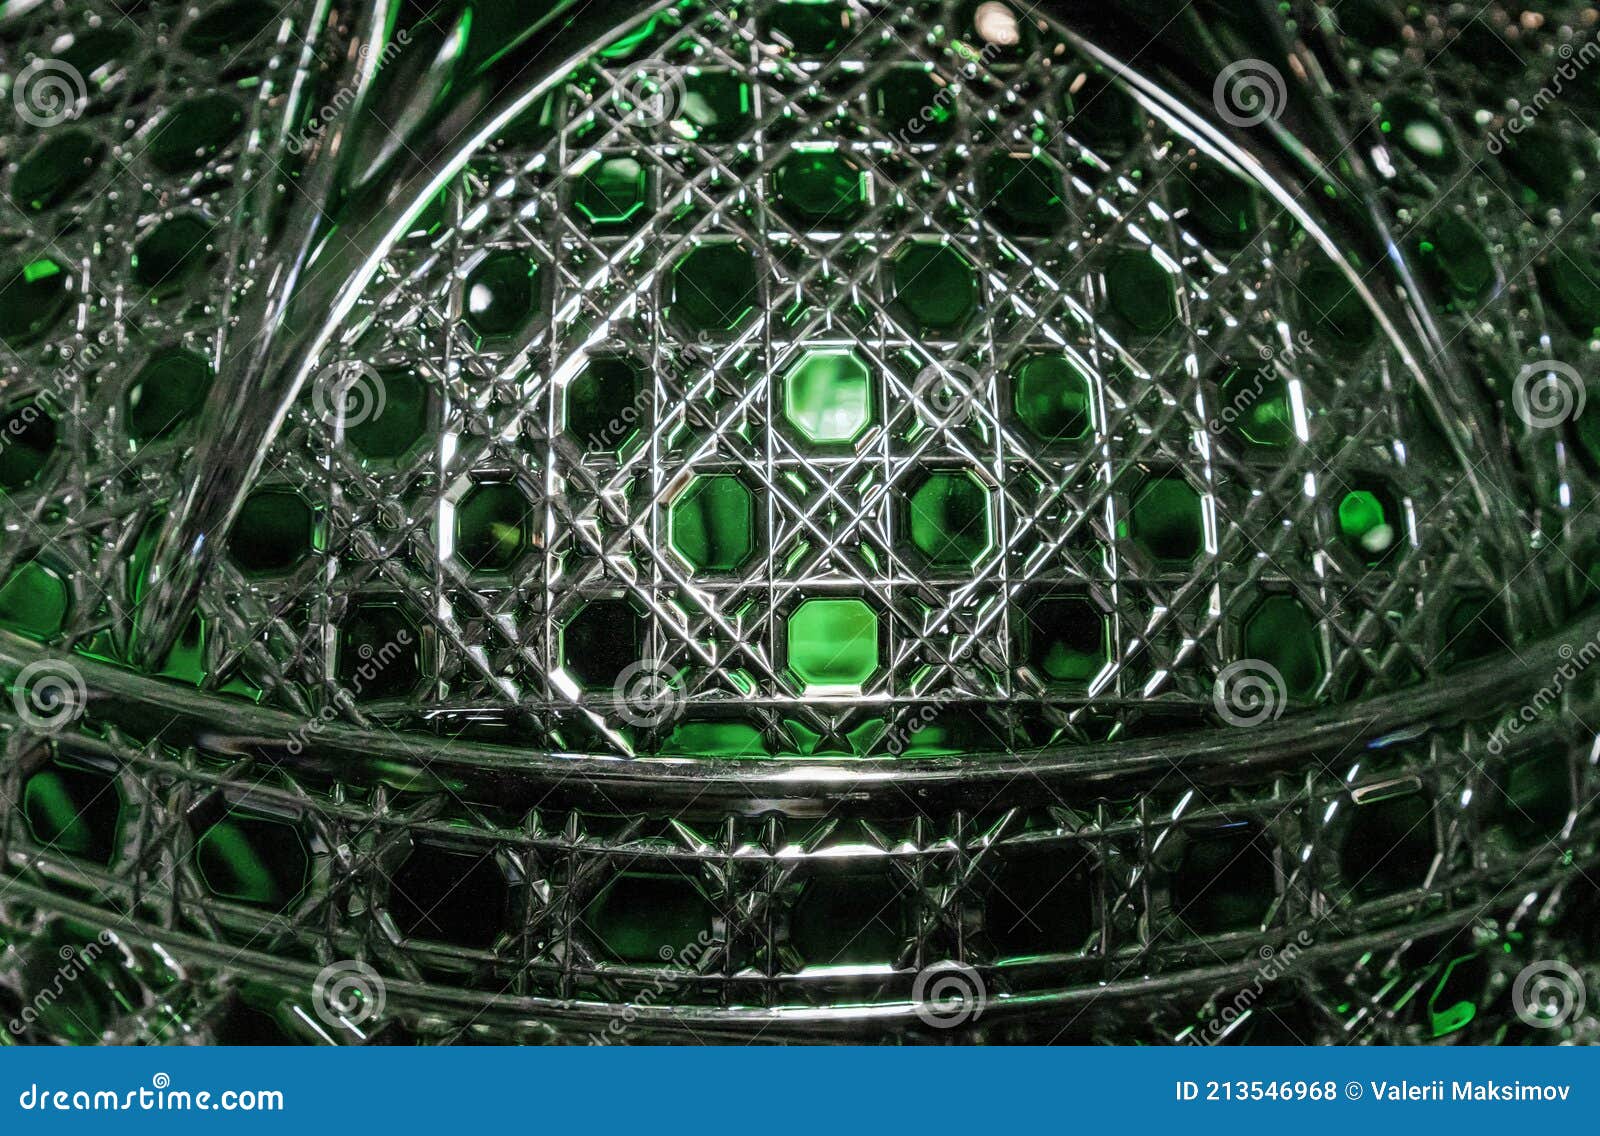 background from a crystal plafond with faceting and green illumination